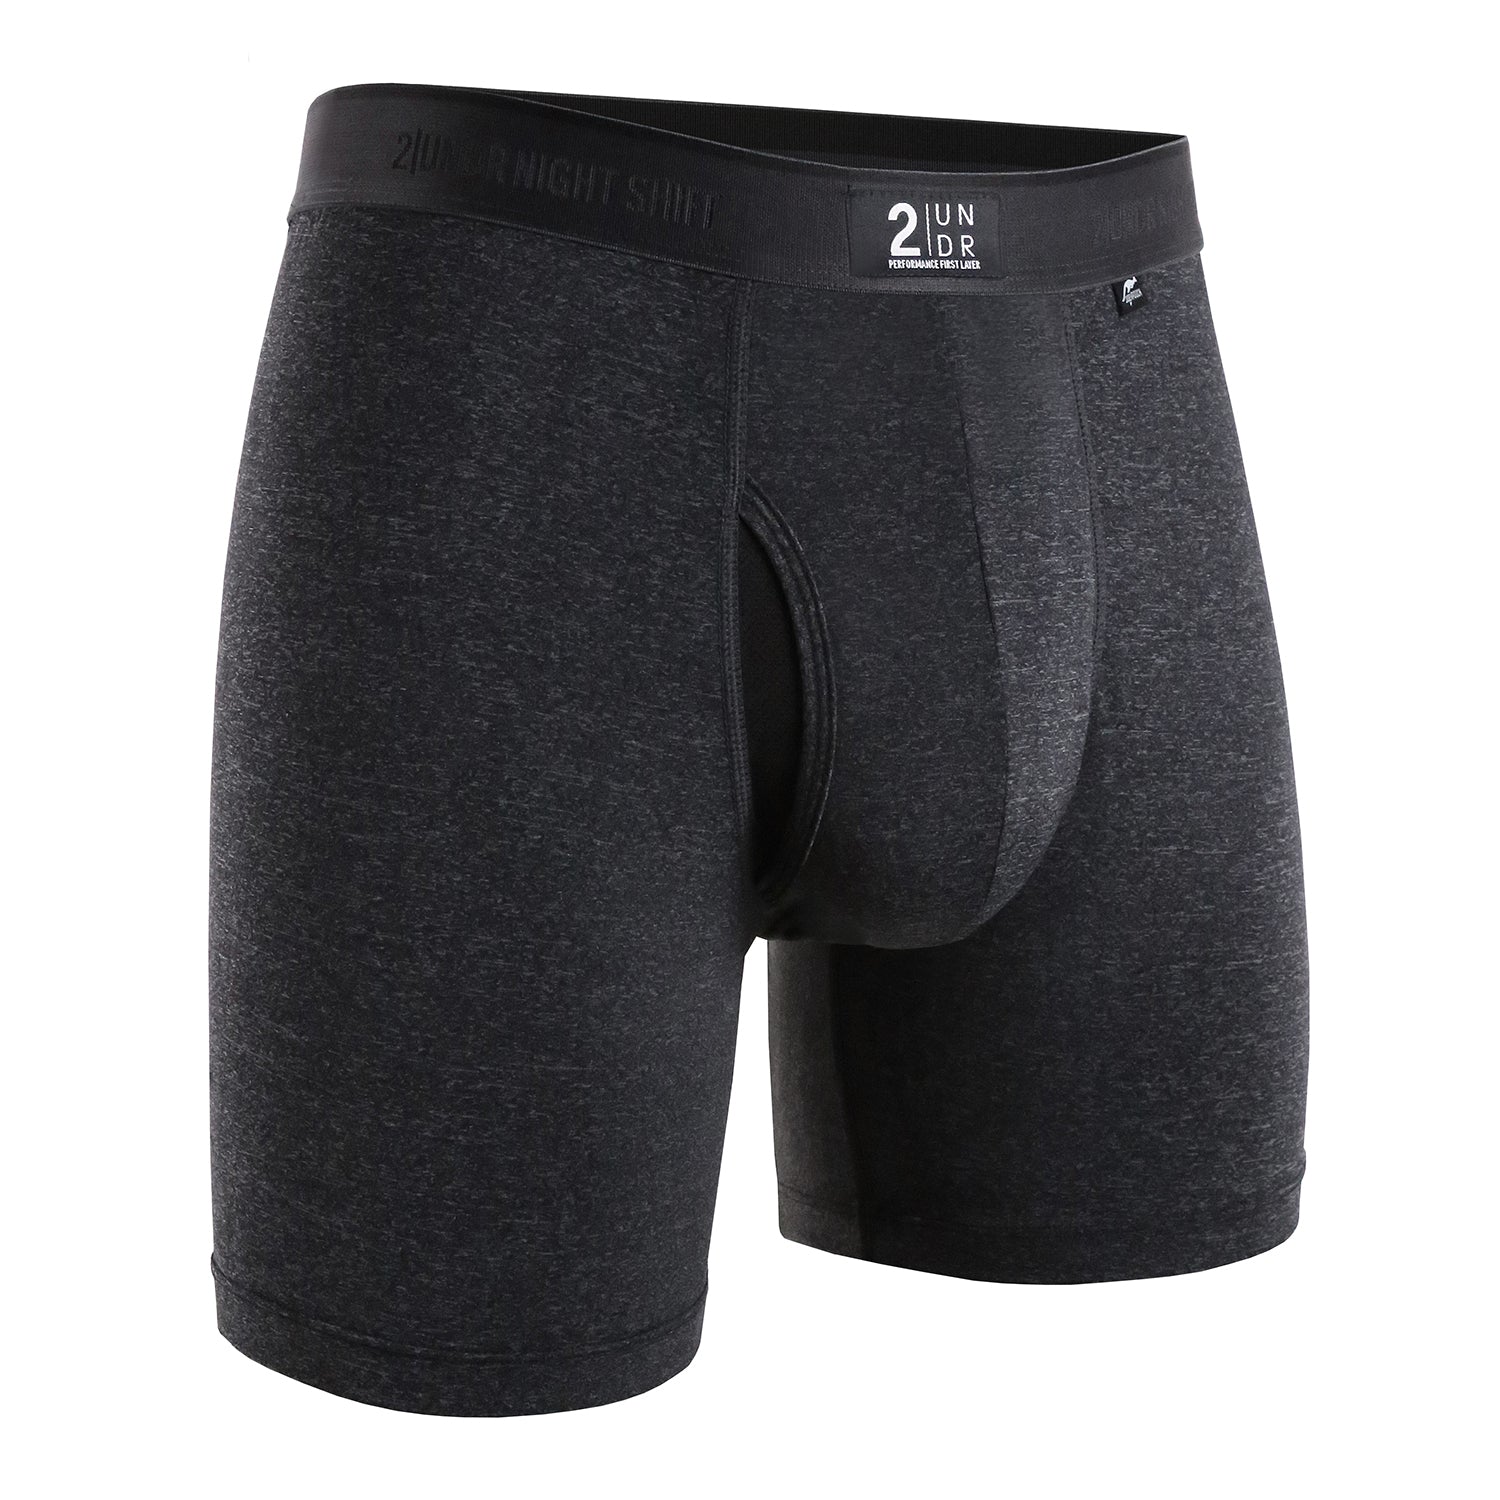 2Undr Night Shift 6" Boxer Brief Solid - Charcoal